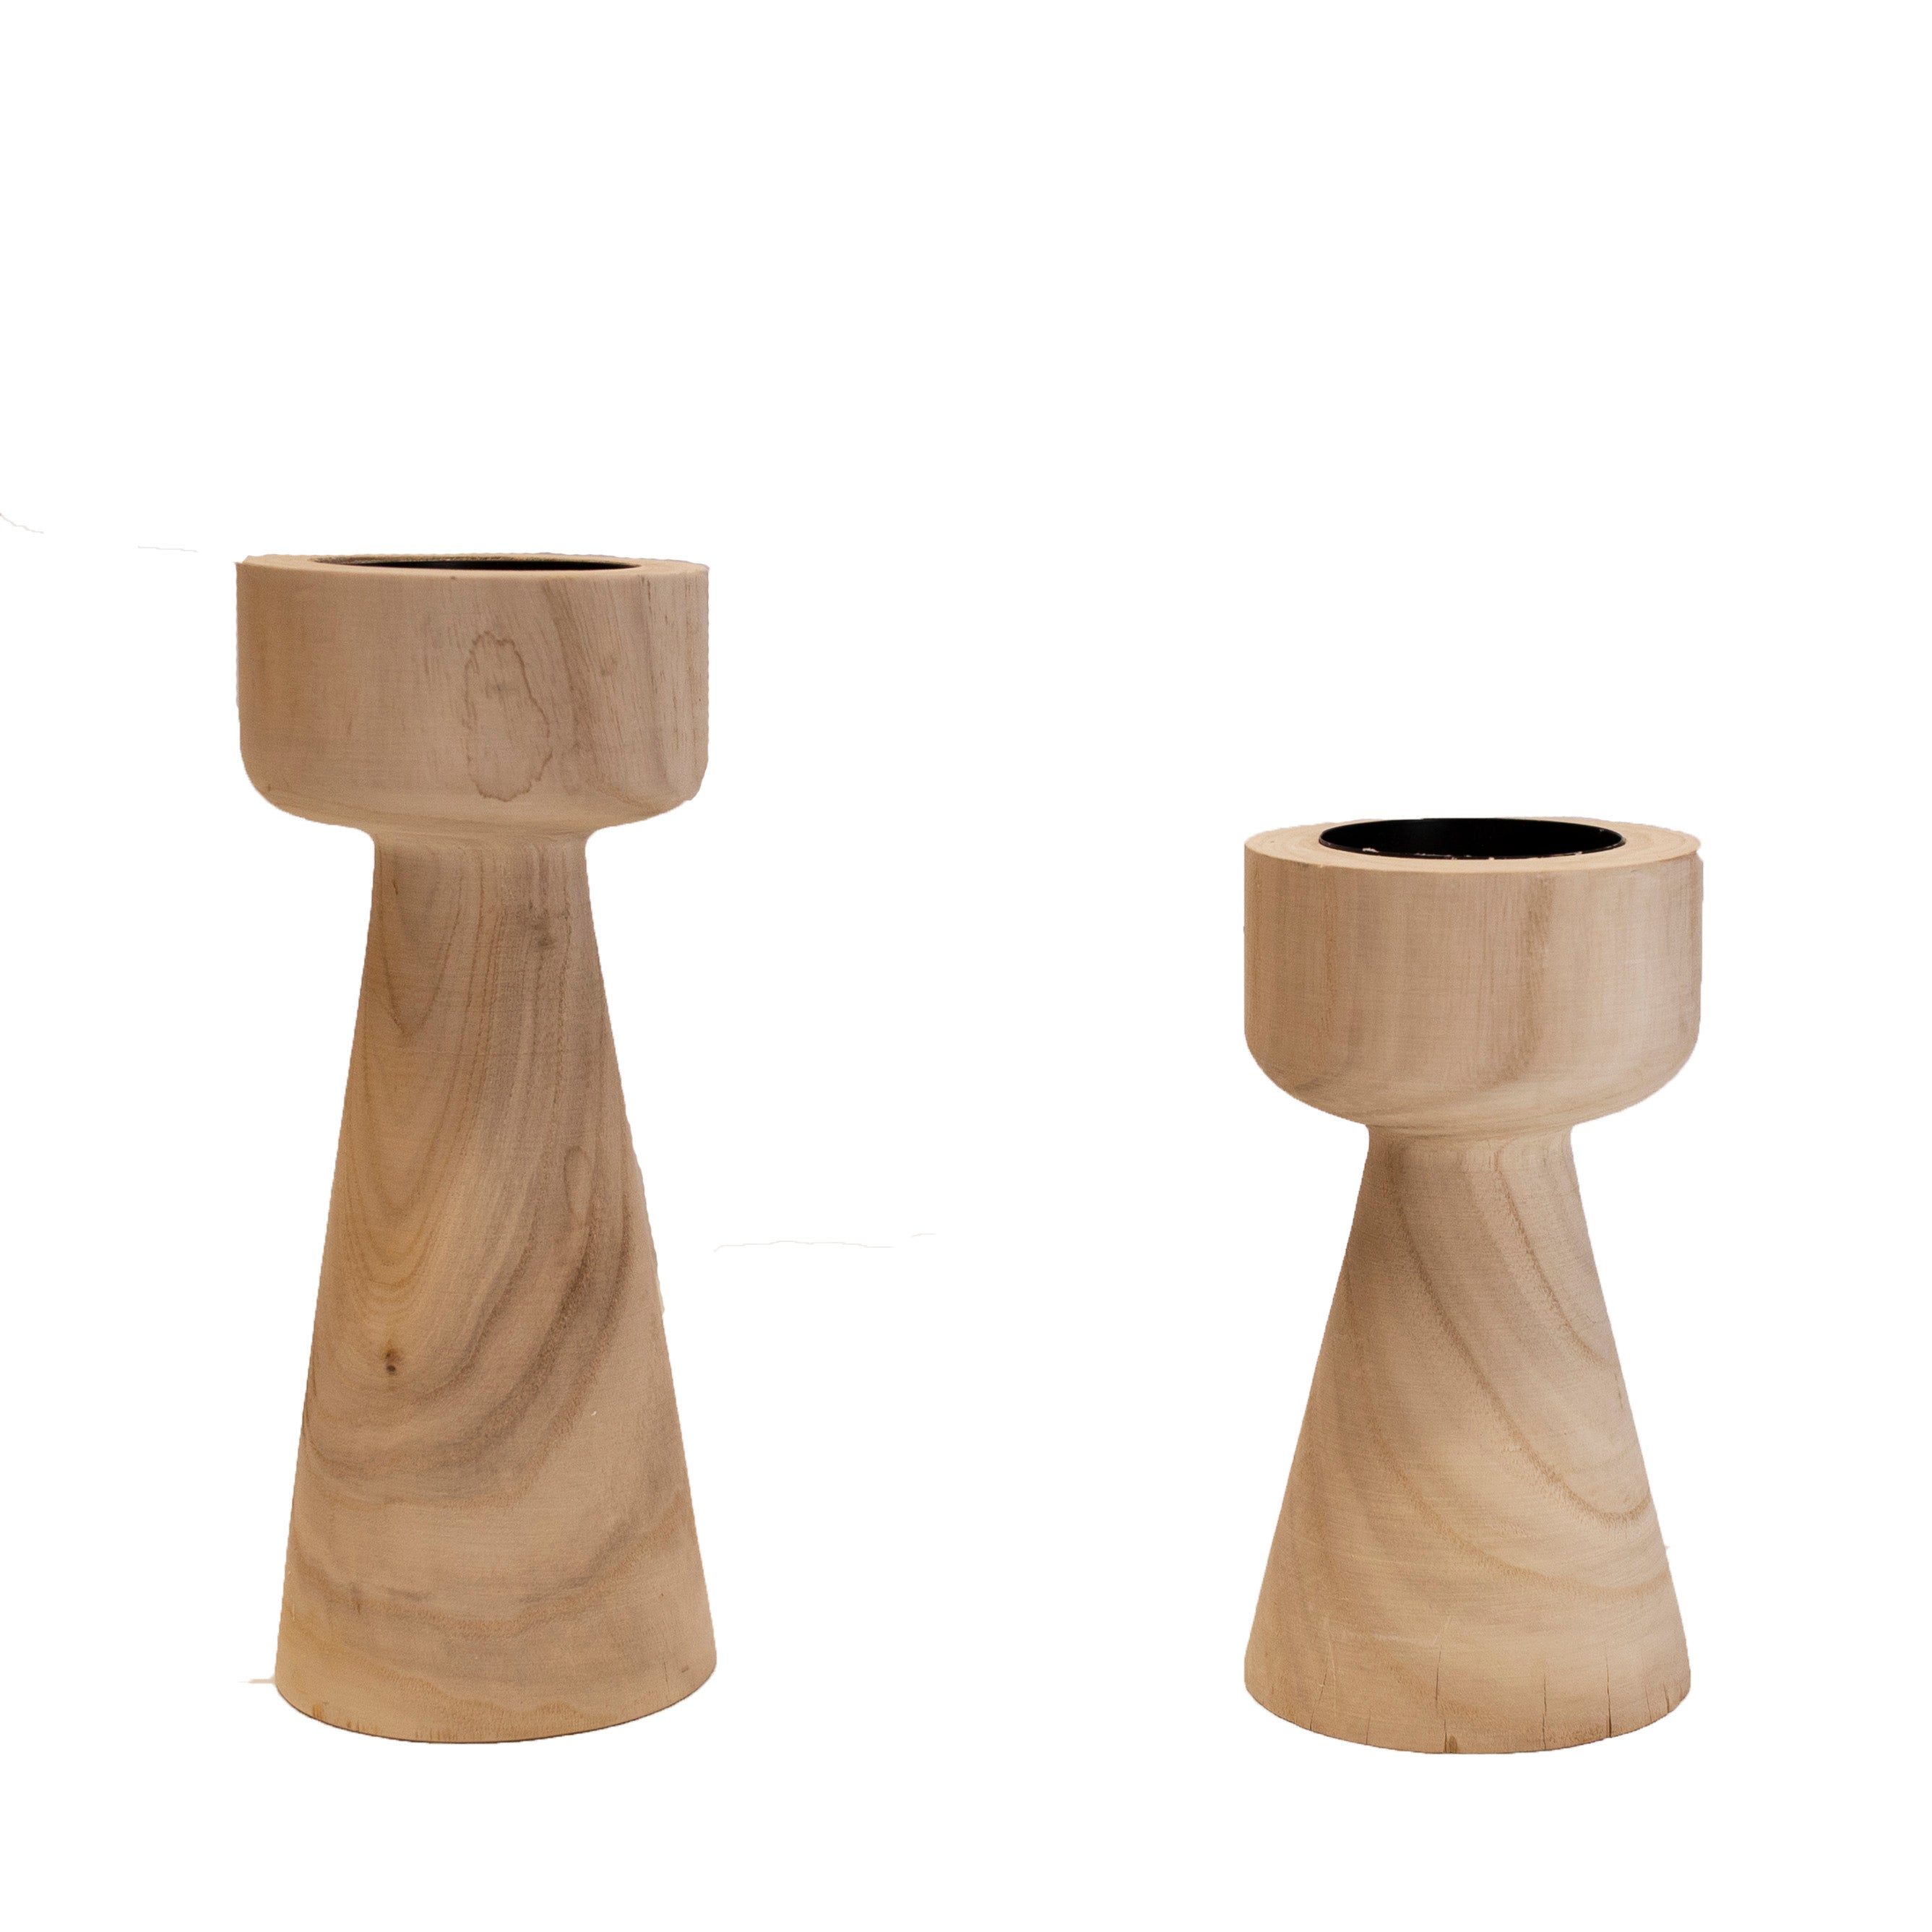 Candlestick Holders - Wood